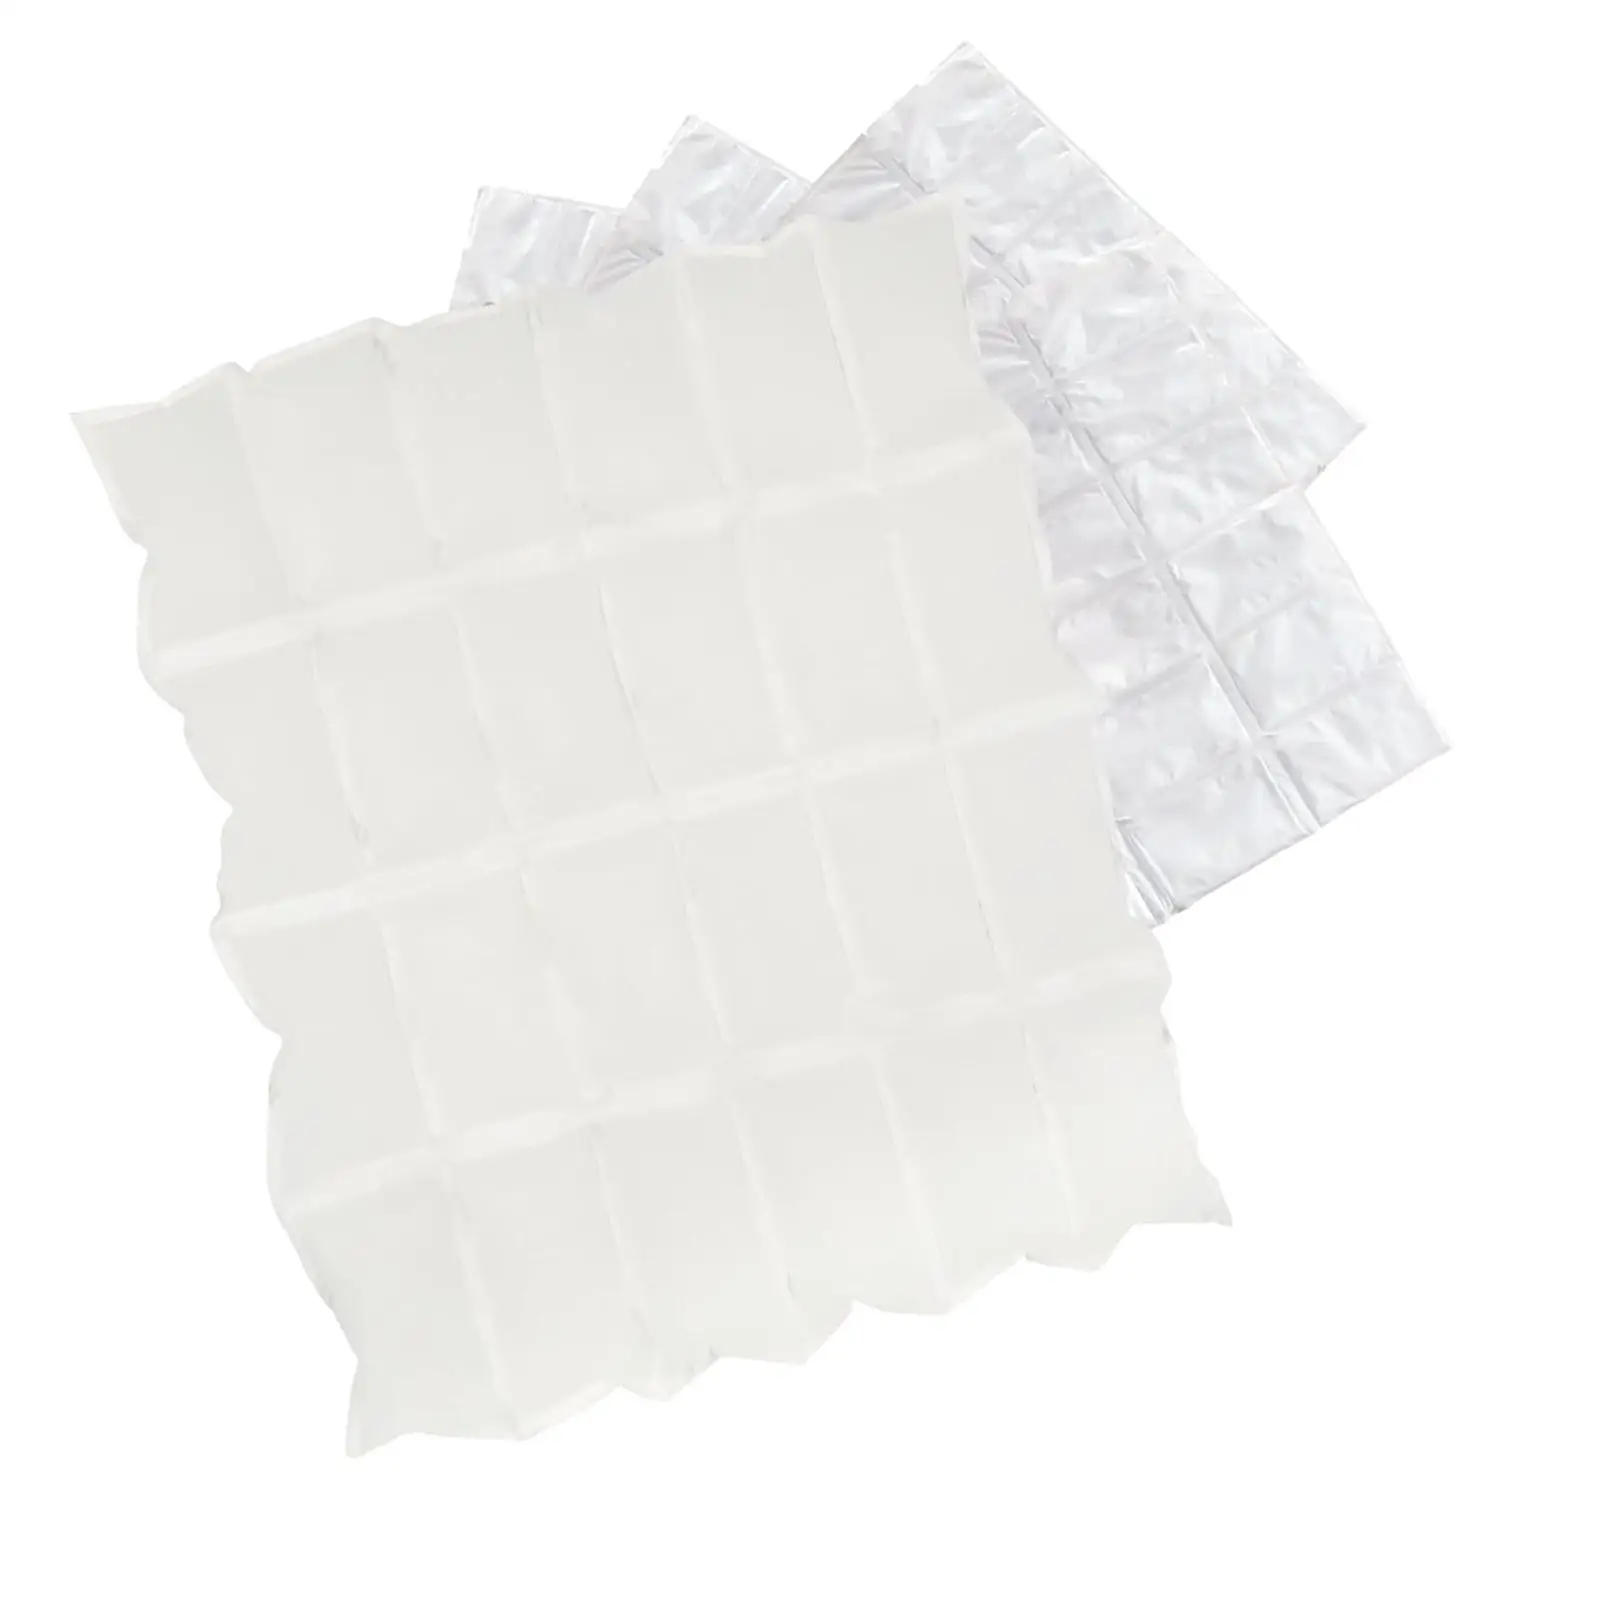 120 Pieces Ice Packs Cuttable Freezer Packs Cold Packs for Shipping Food Keep Food Fresh Lunch Bags Refrigerate Food